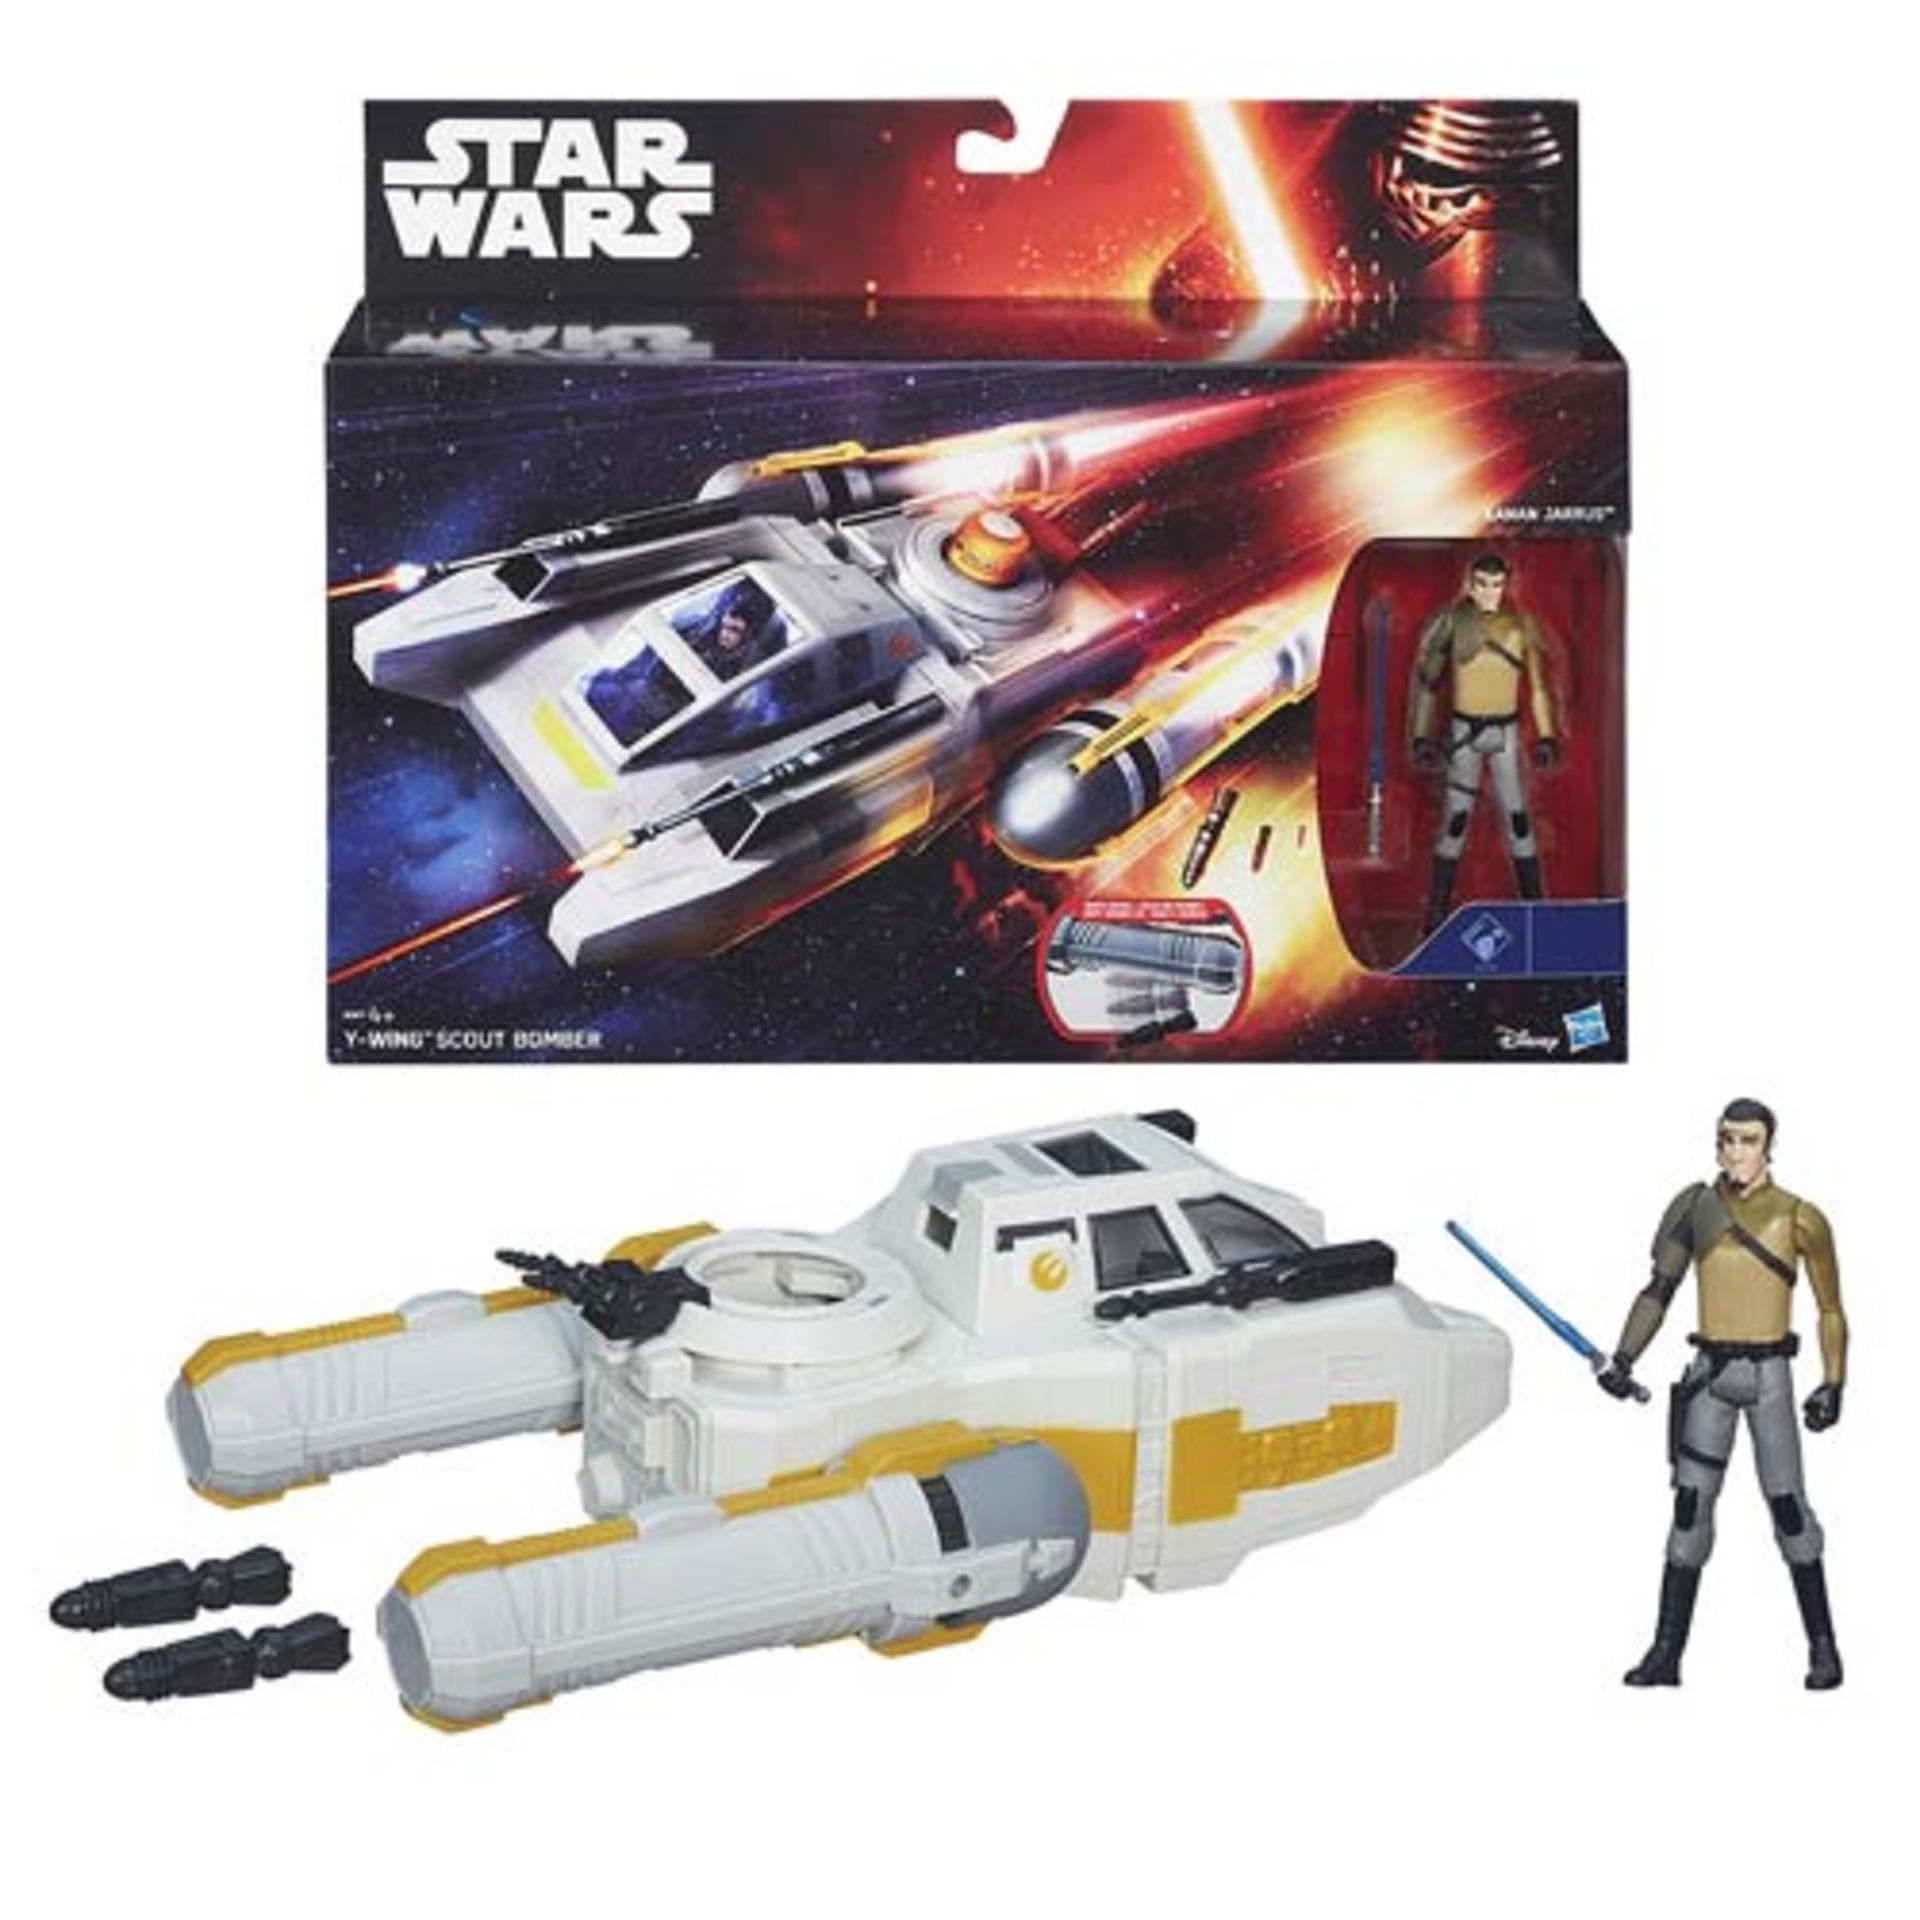 + VAT Brand New Hasbro Star Wars Y-Wing Scout Bomber With Kanan Jarrus Figure - Drops Bombs - With